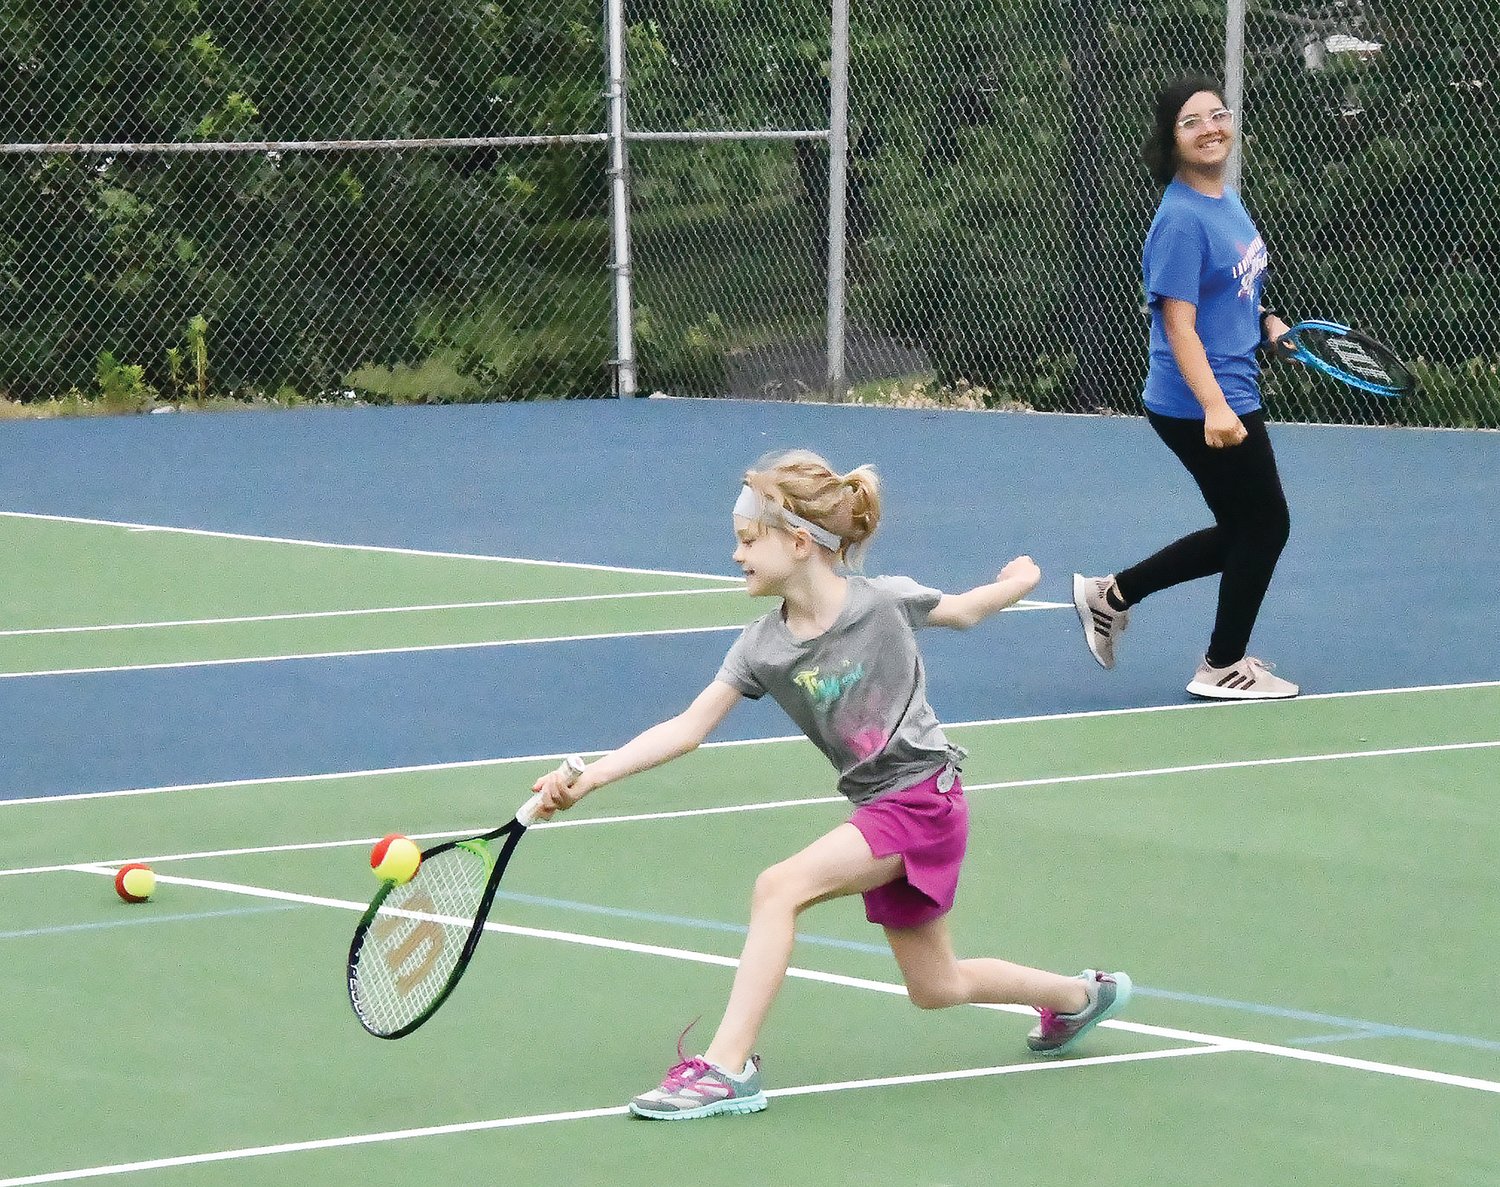 Alexa Moore gets the racket on the ball while Natalie Perez smiles in the background during tennis lessons.